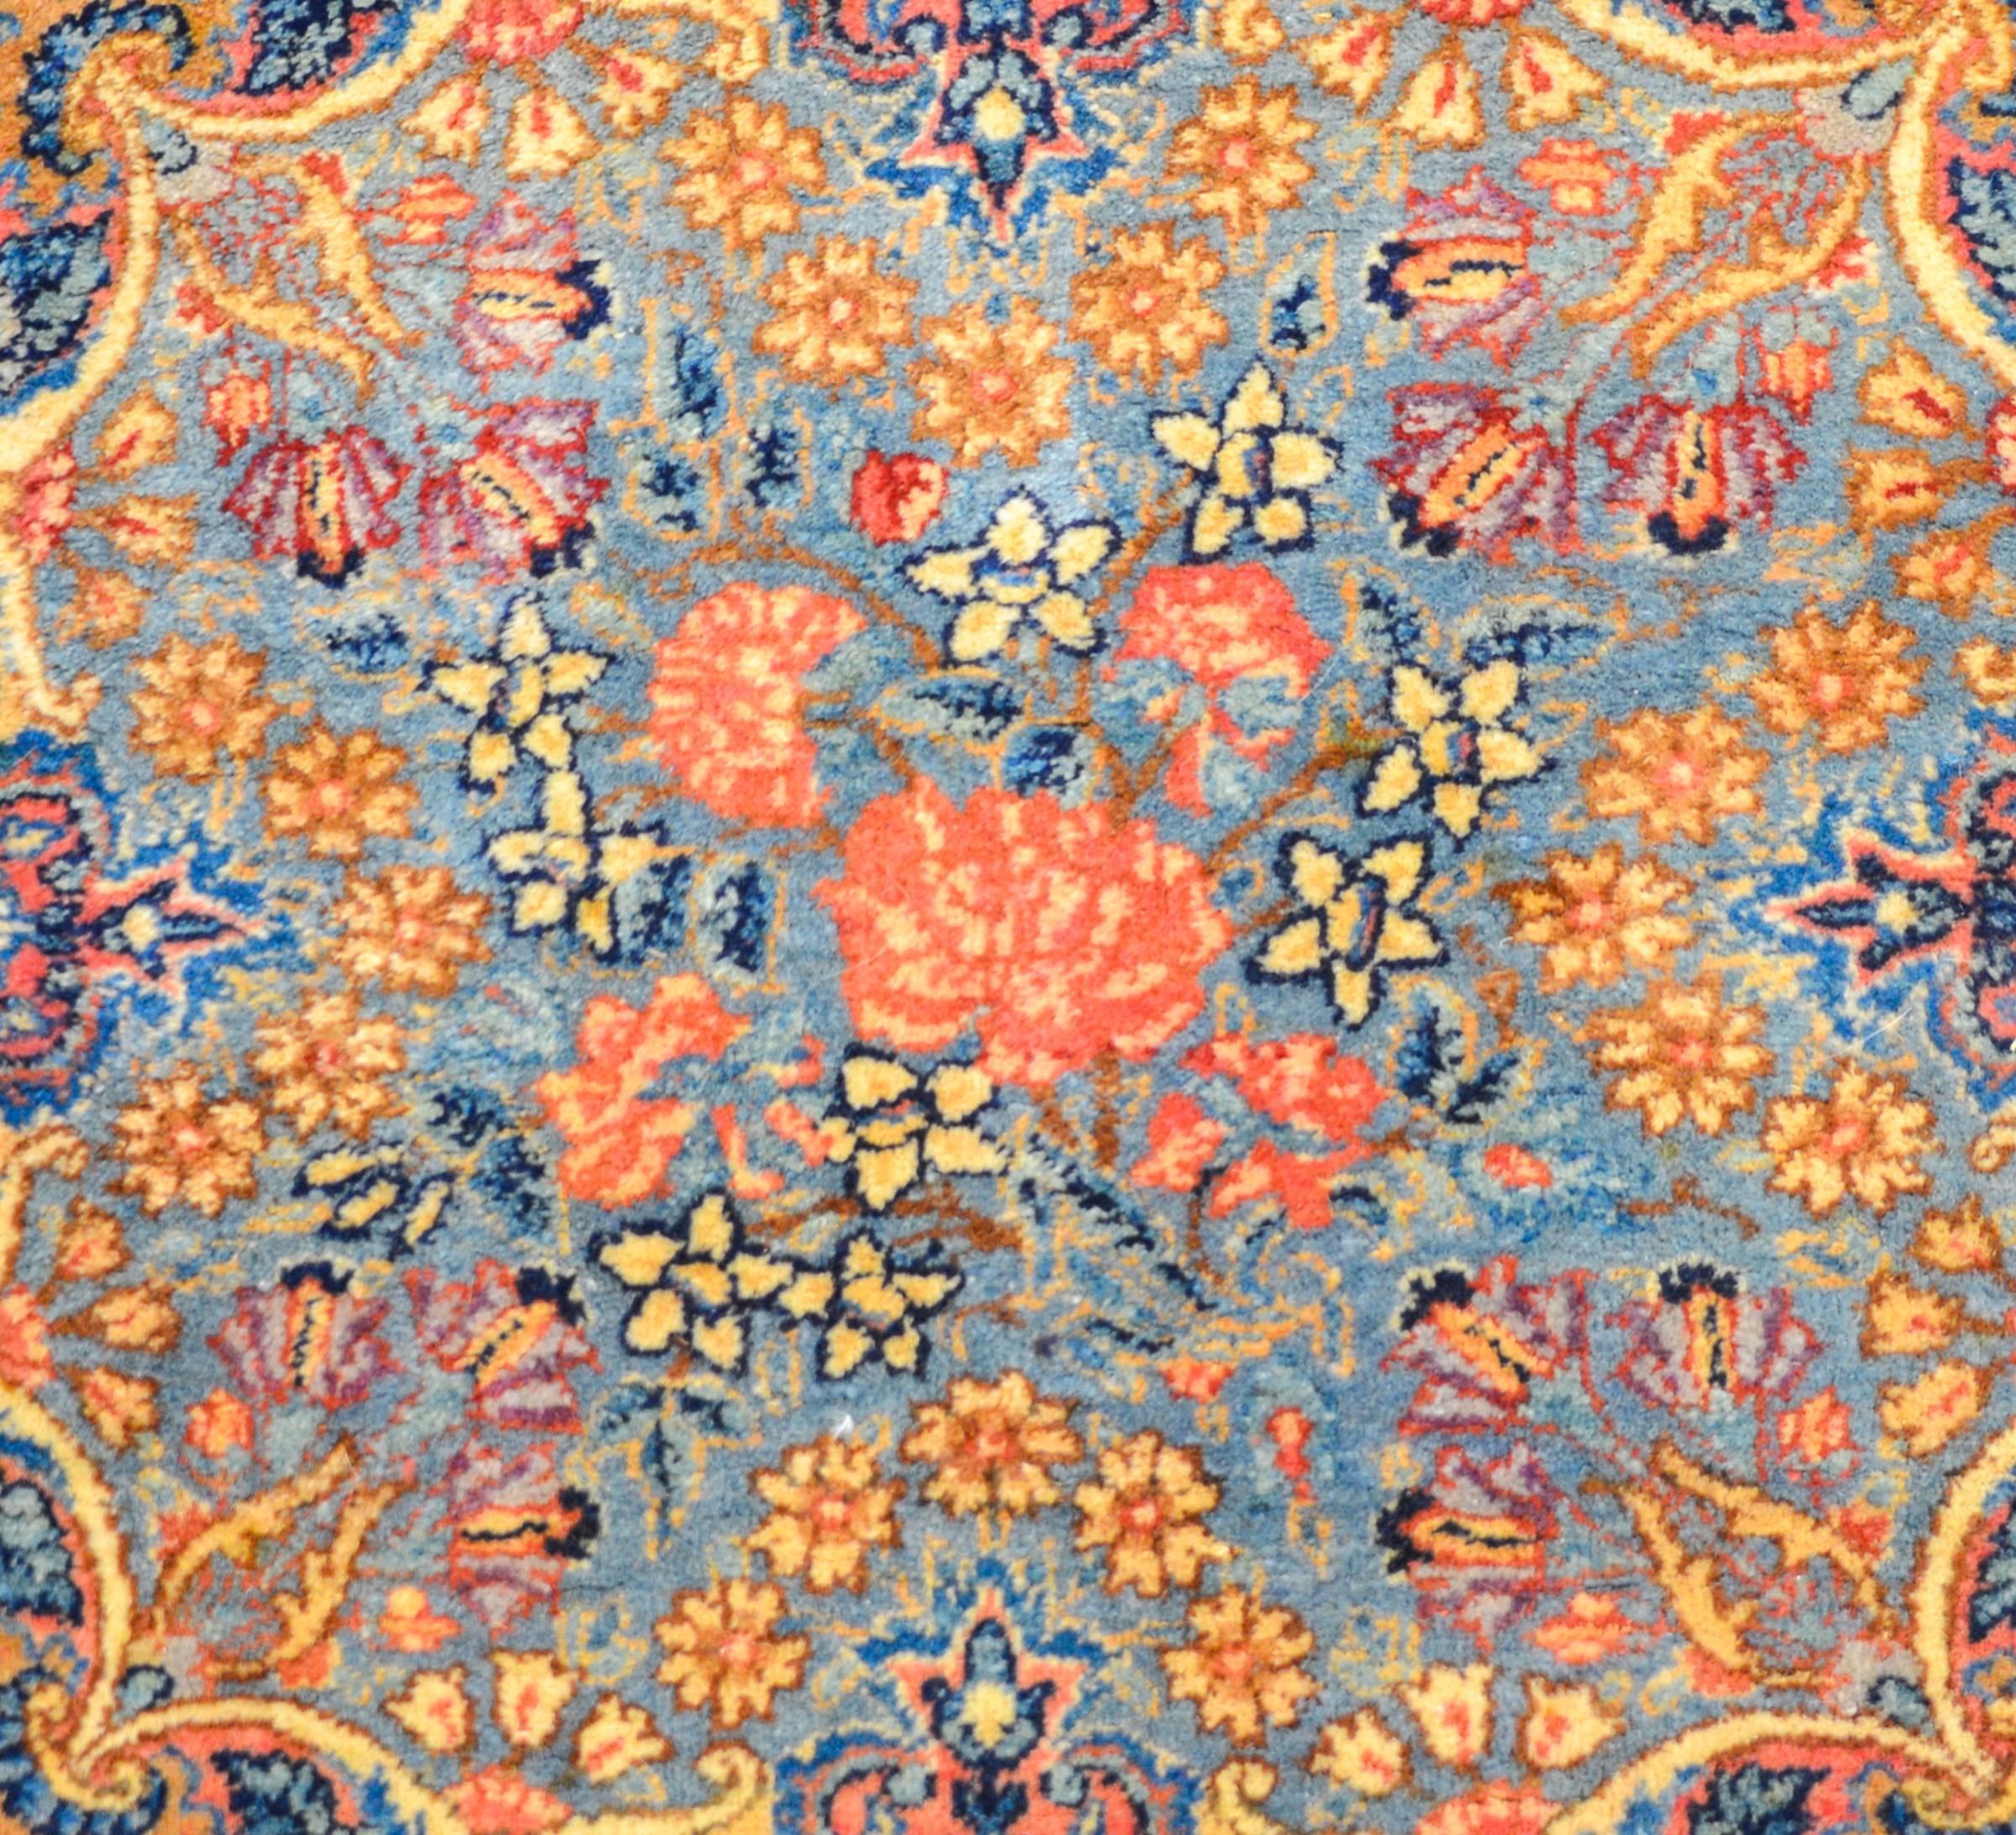 A petite early 20th century Persian Kirman mat rug with a fantastic all-over multicolored pattern depicting myriad varieties of blossoming plants. The background is pale indigo, and the flowers are woven in pink, yellow, green, indigo and violet.